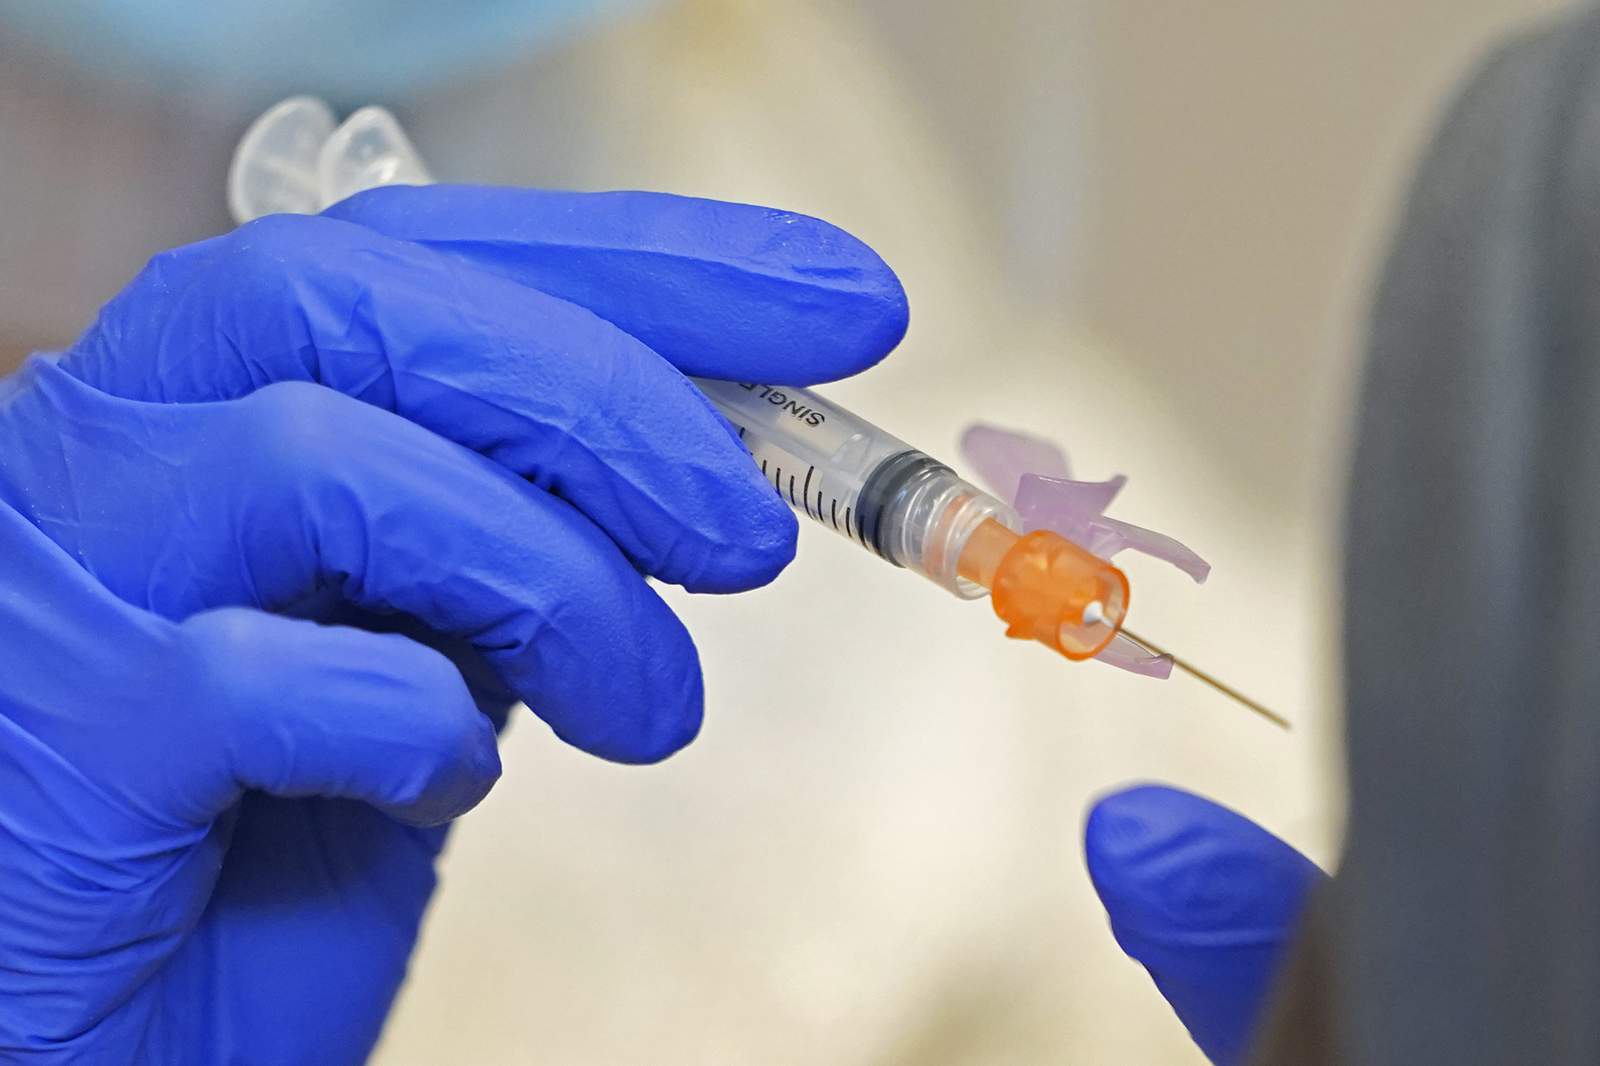 200+ people got vaccinated in Bexar County without revealing their age, Metro Health confirms